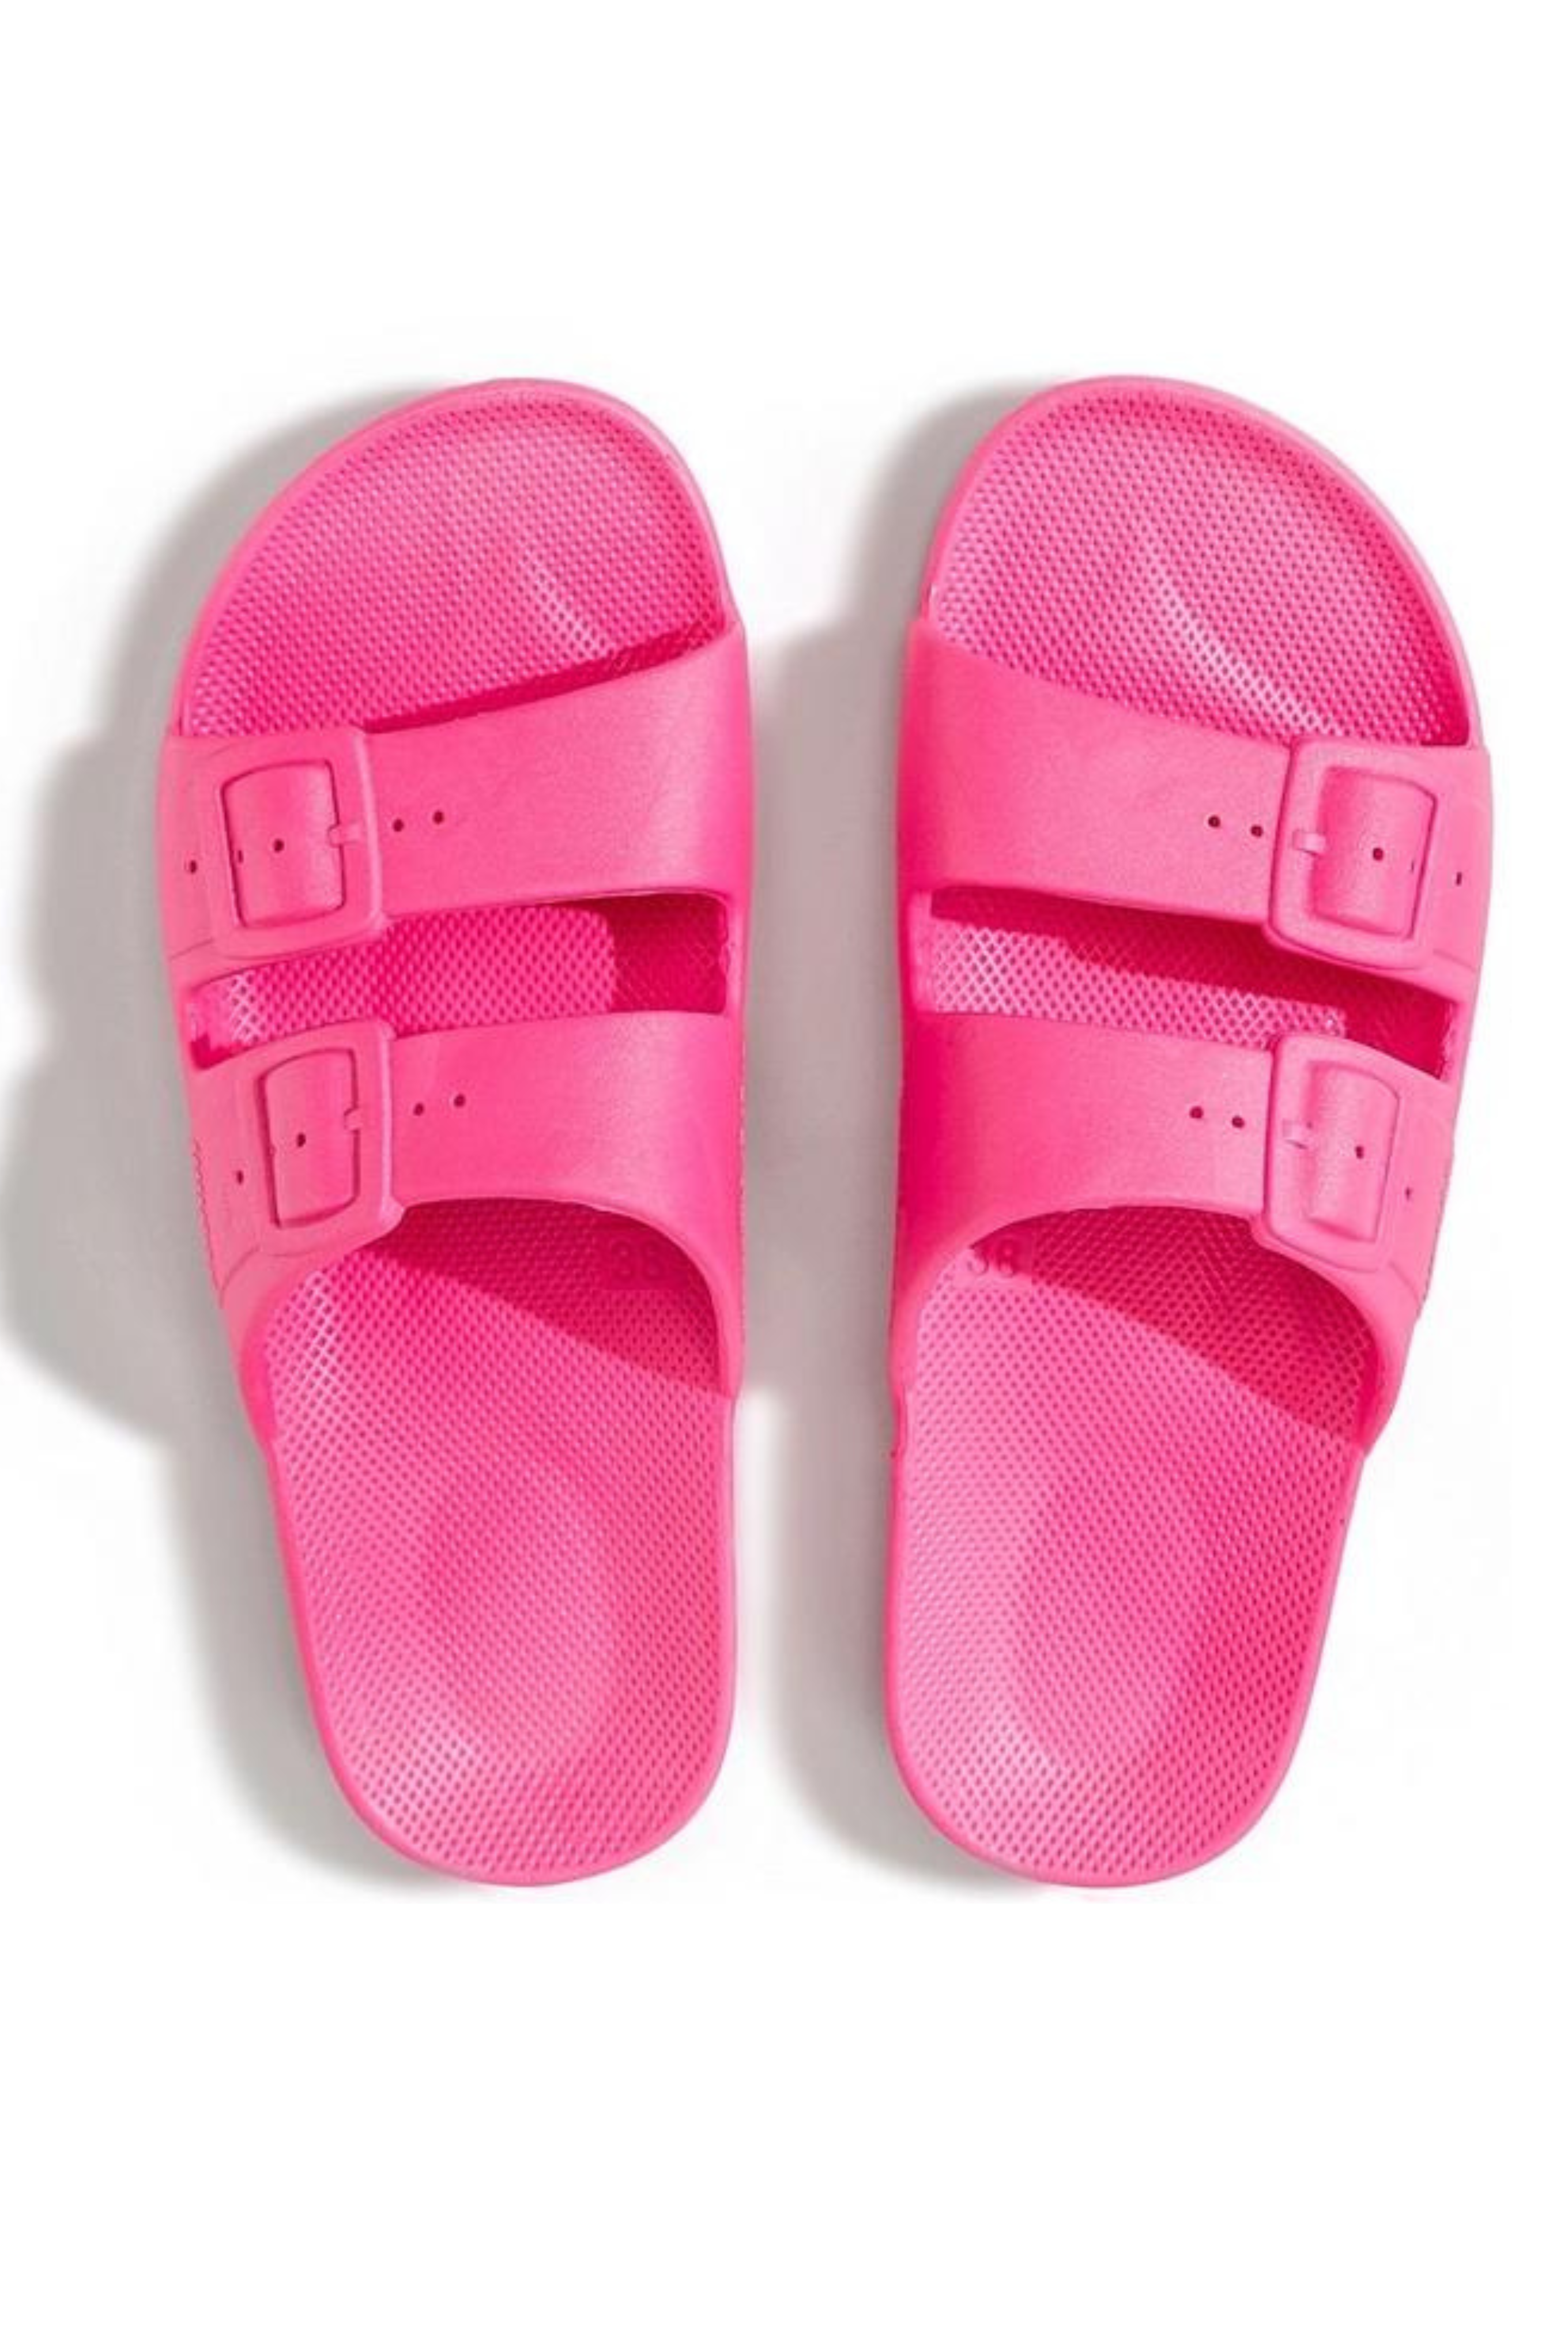 MOSES SLIDES - HAPPY PINK